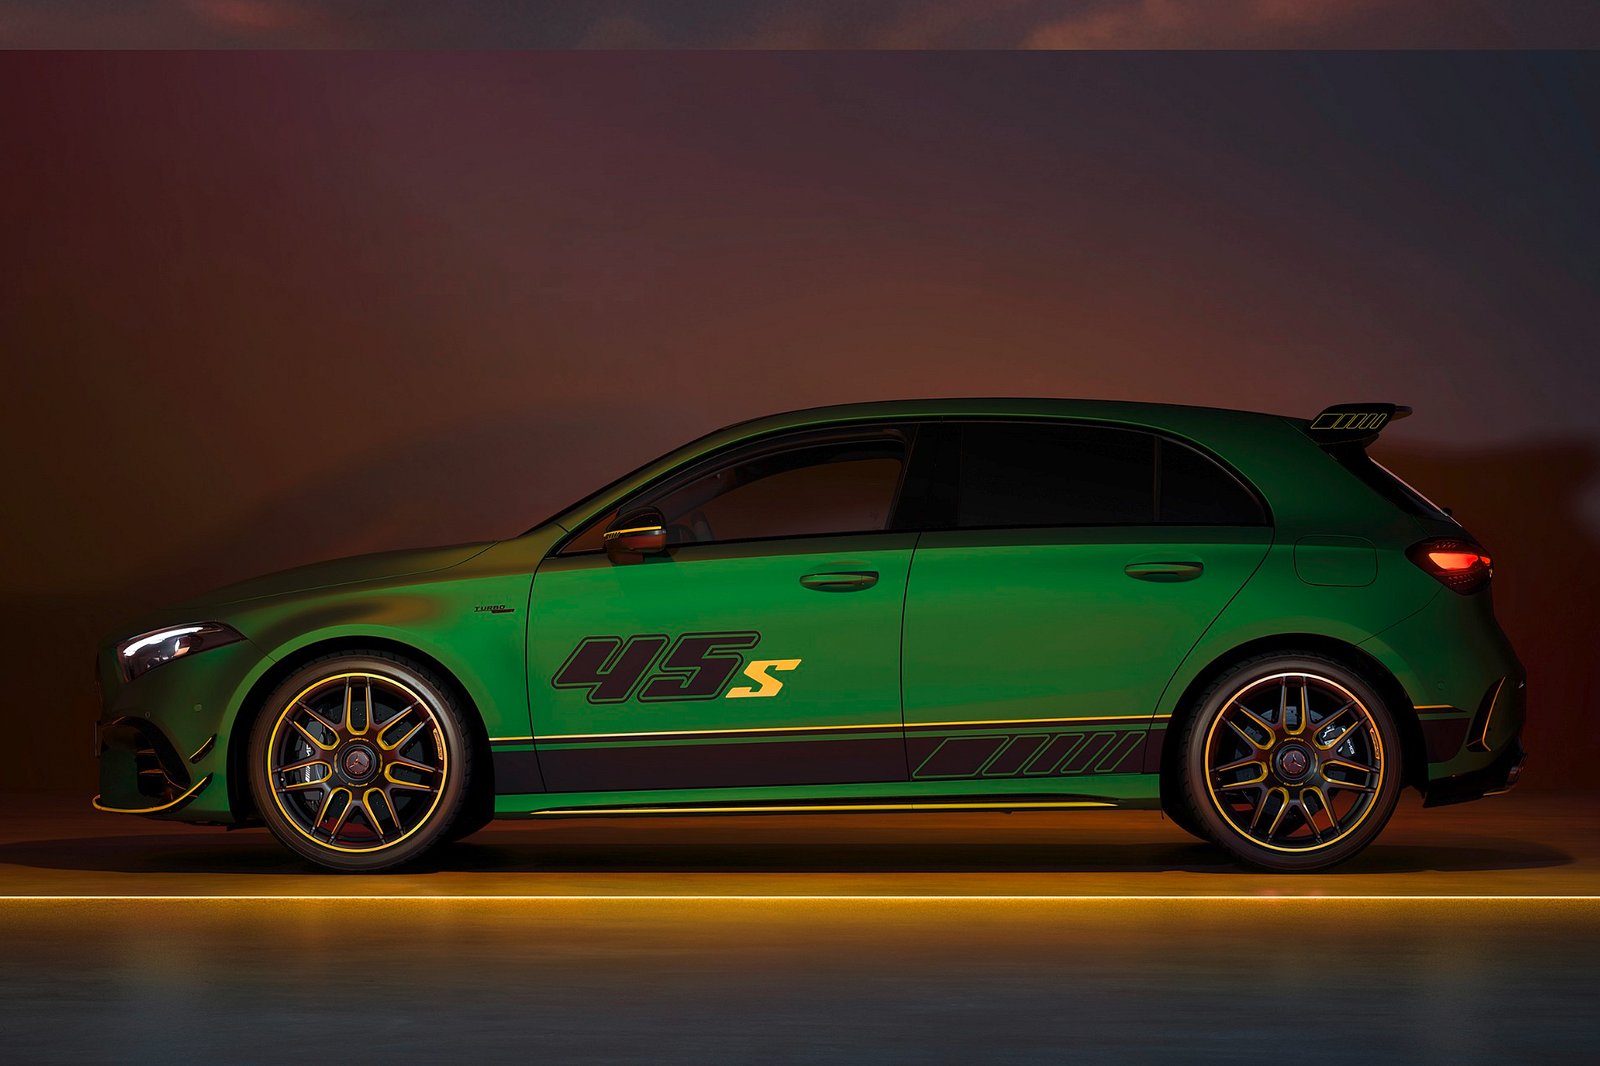 Mercedes-AMG Reveals A45 S Limited Edition With Loud Green Hell Magno Paintwork